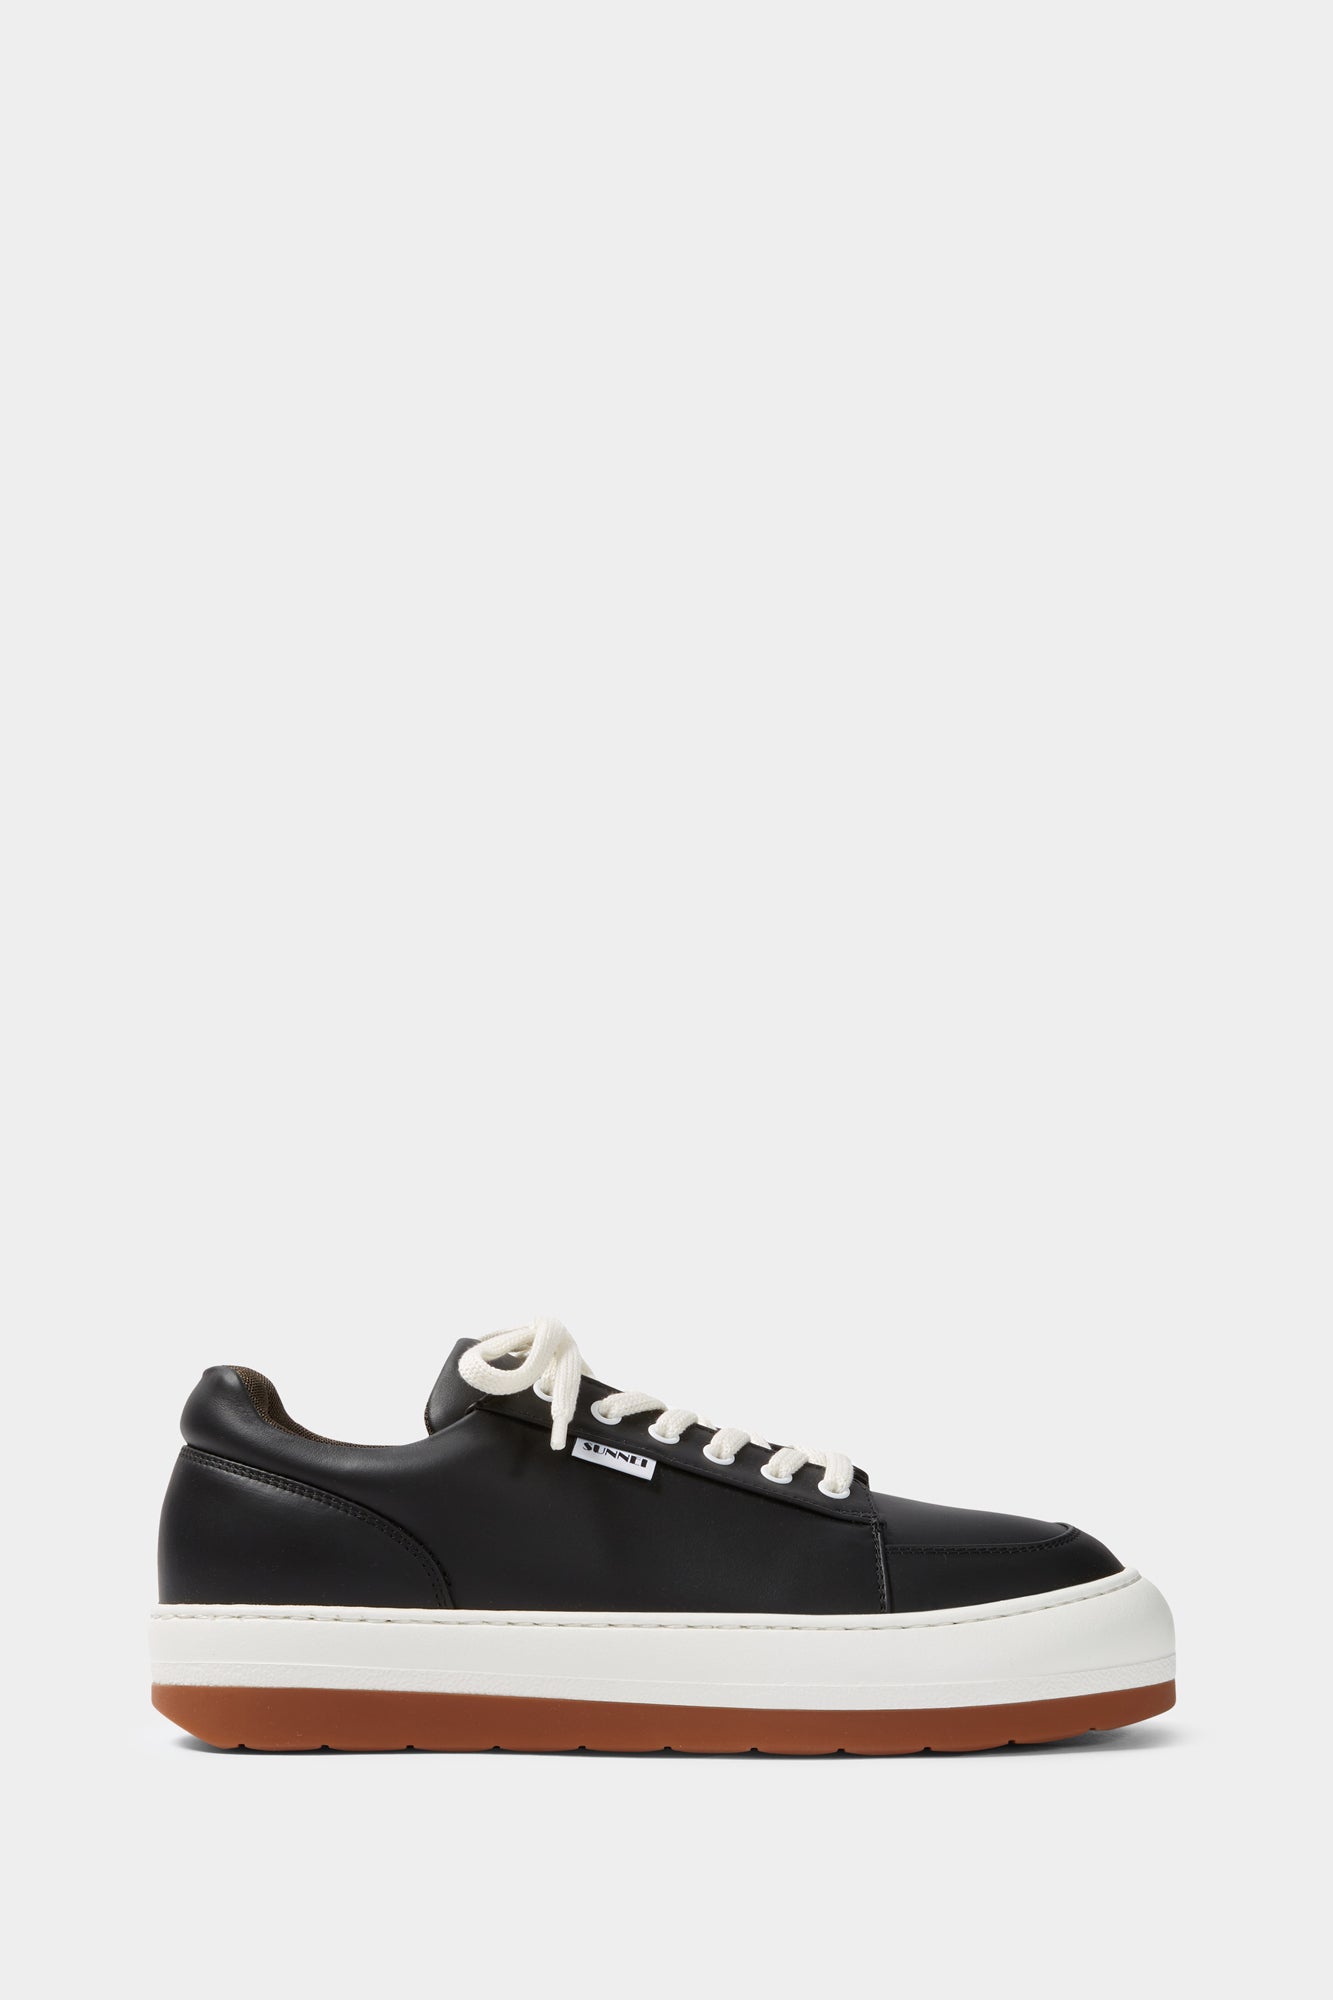 DREAMY SHOES / leather / black